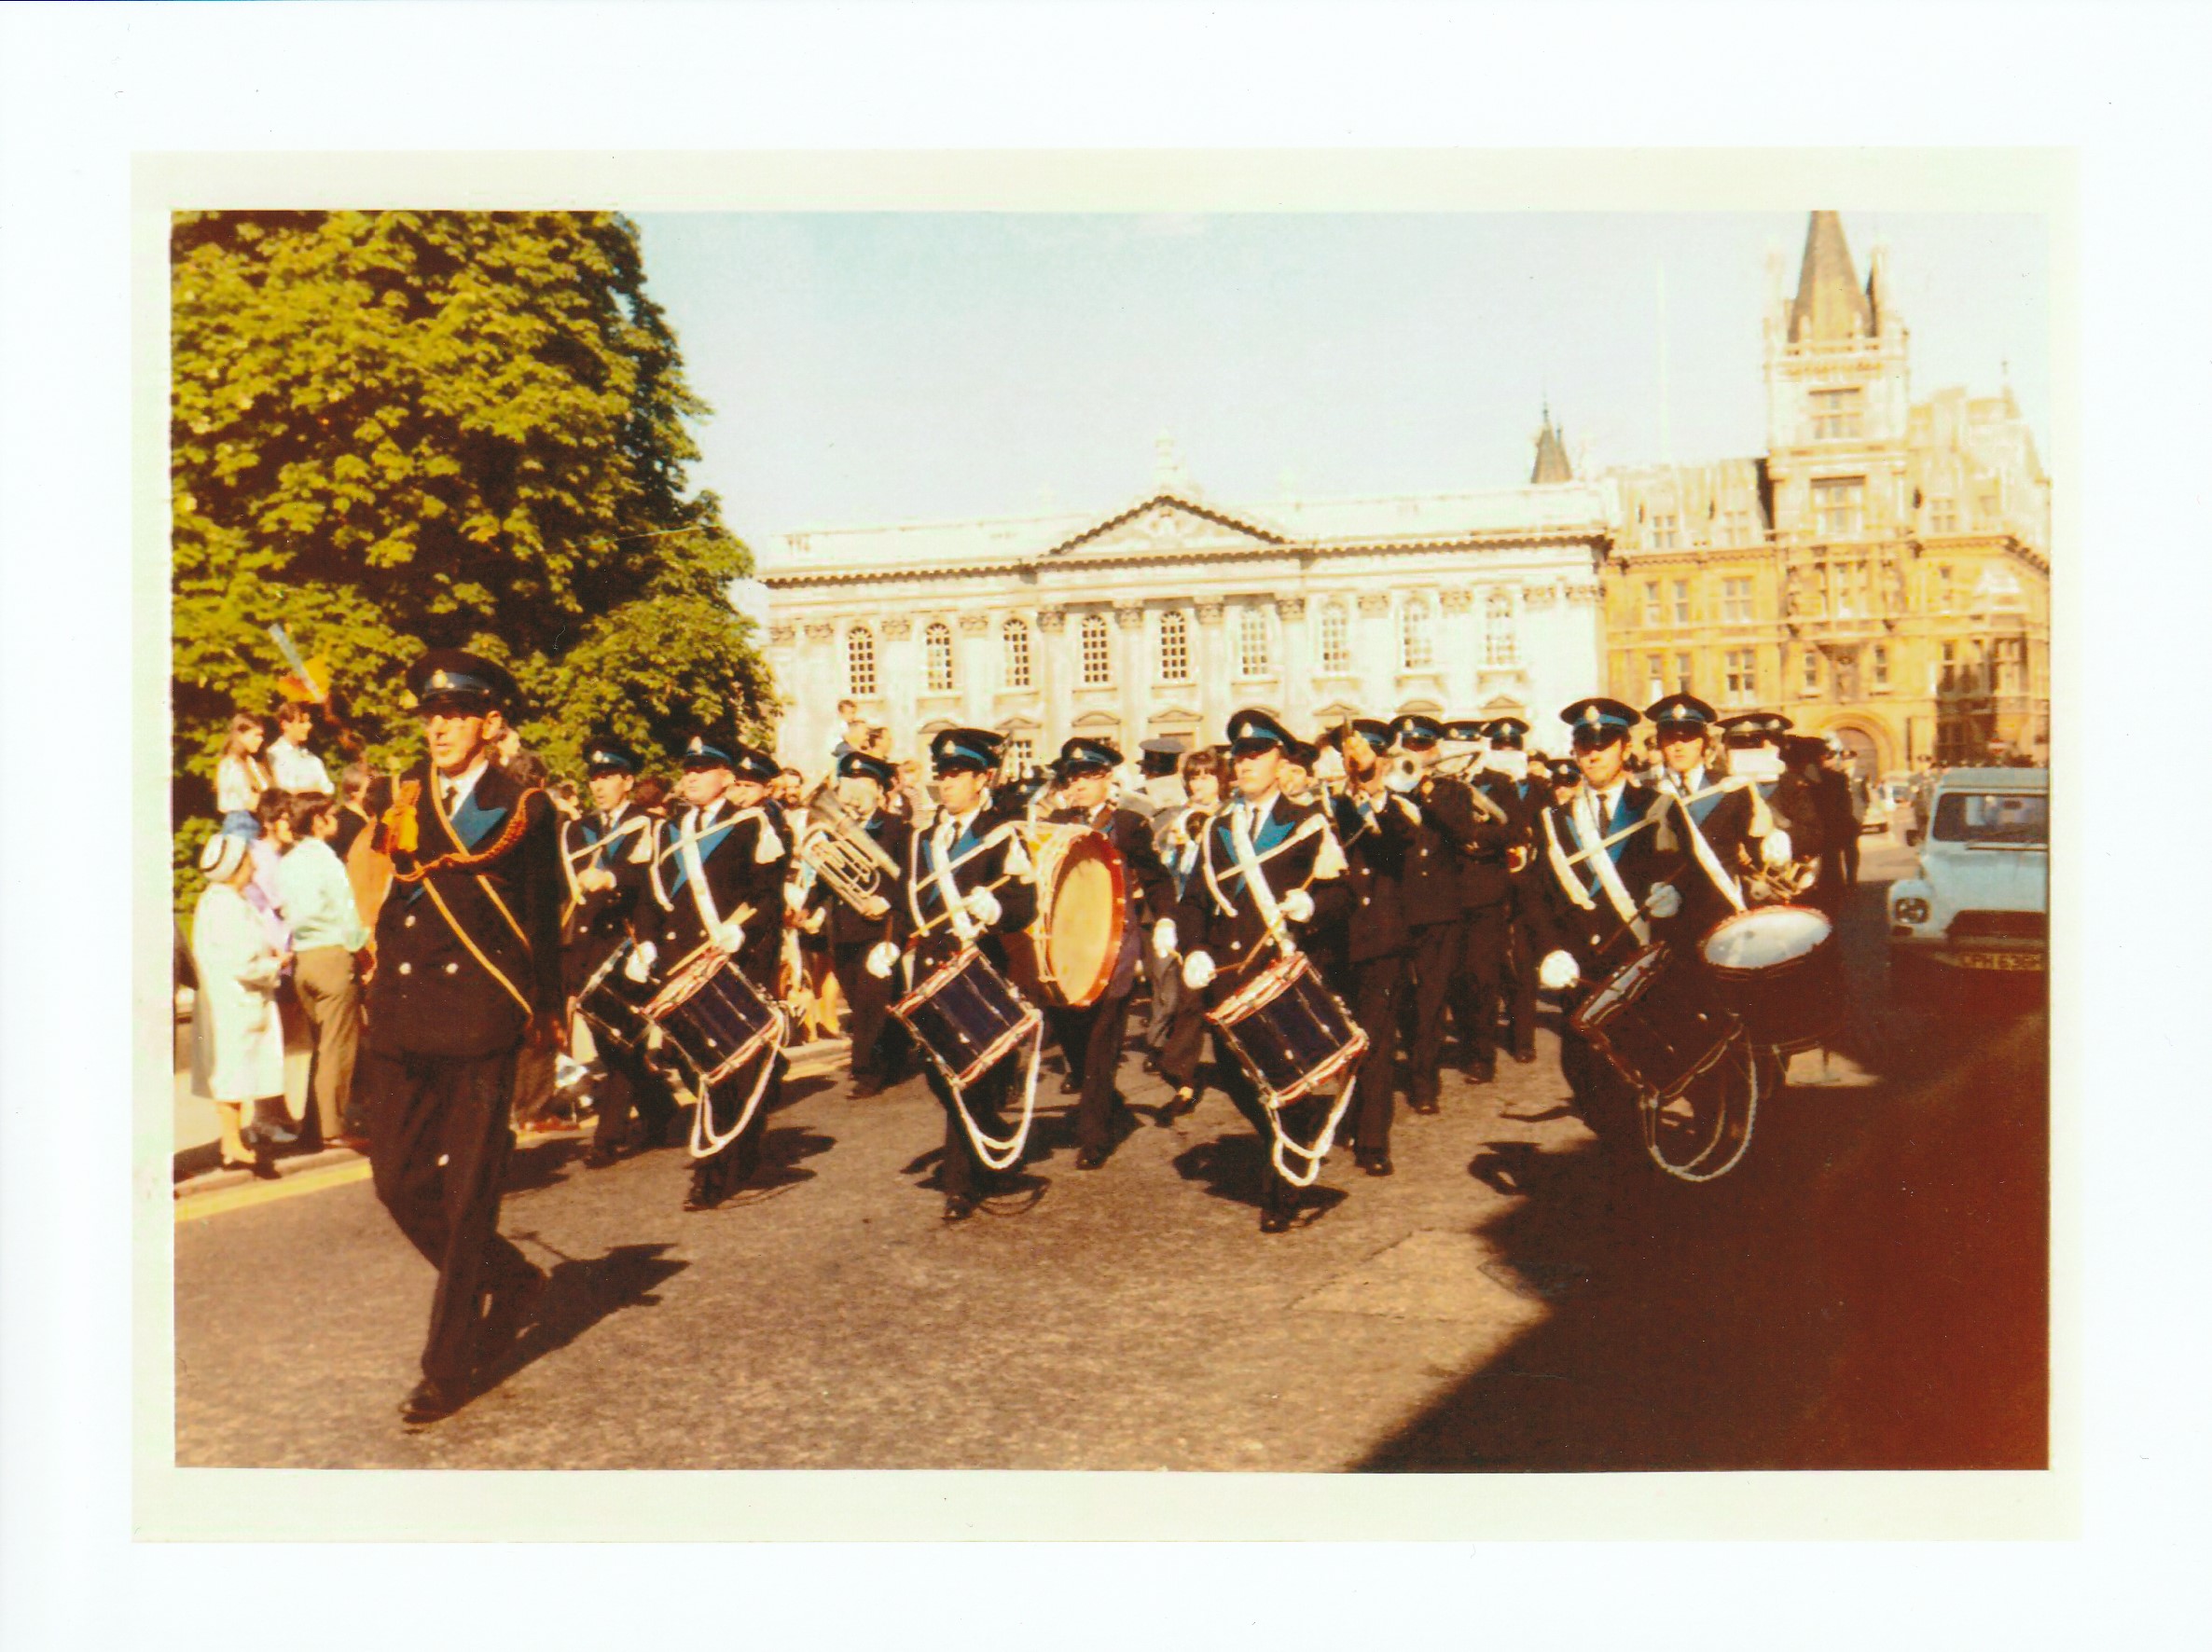 Ely Band, Cambridge, Early 1970s